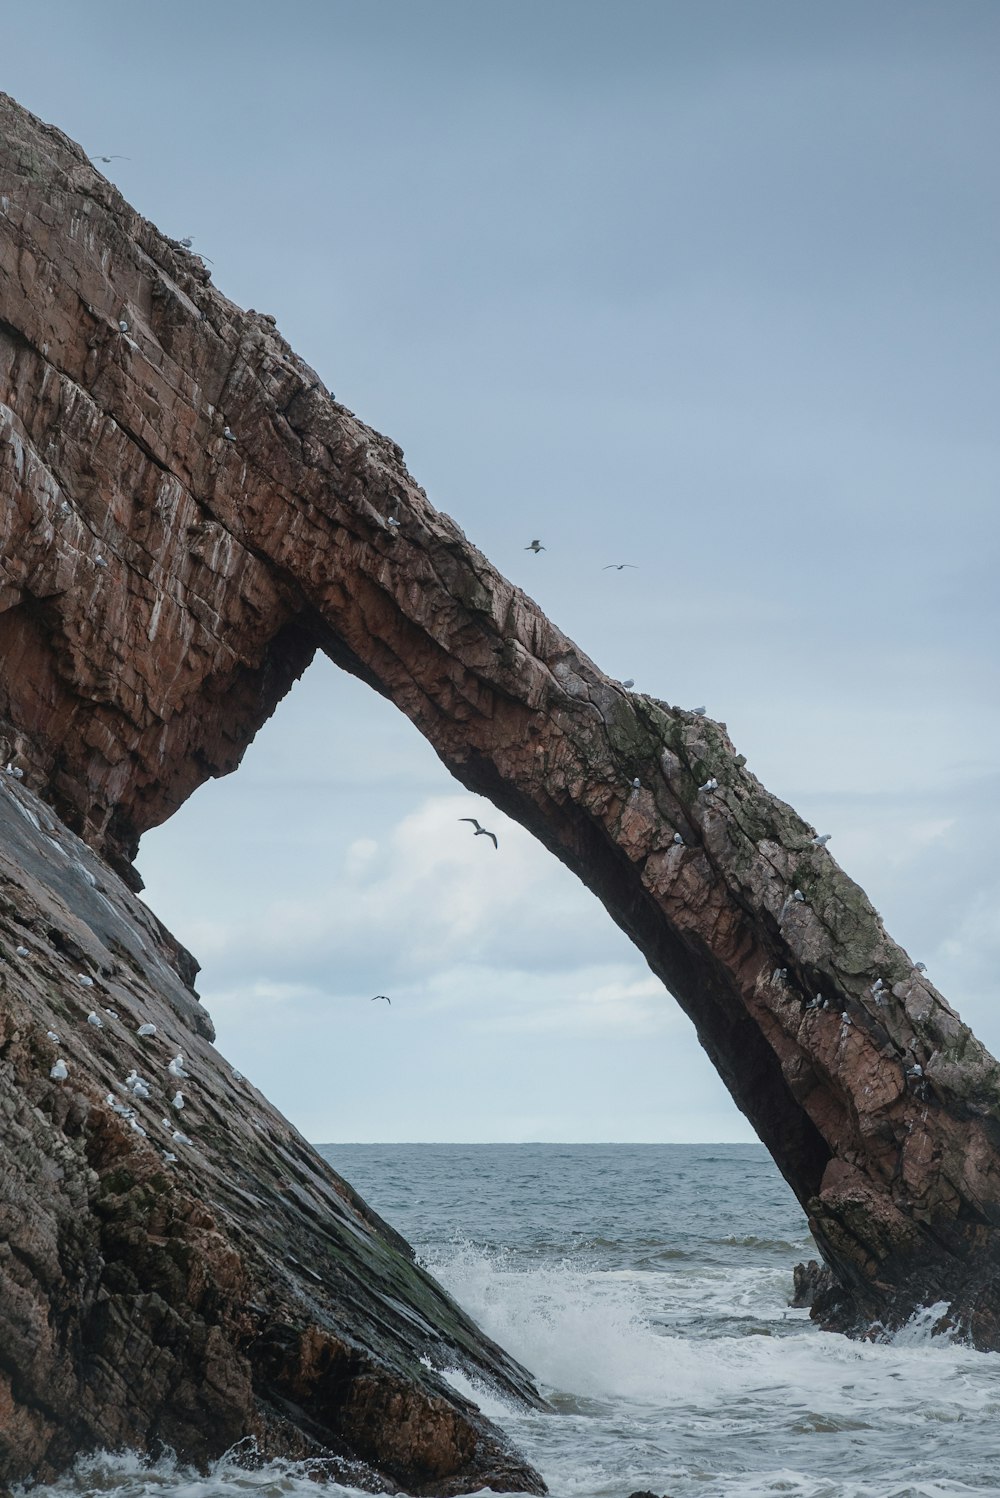 a large rock formation with a seagull flying over it